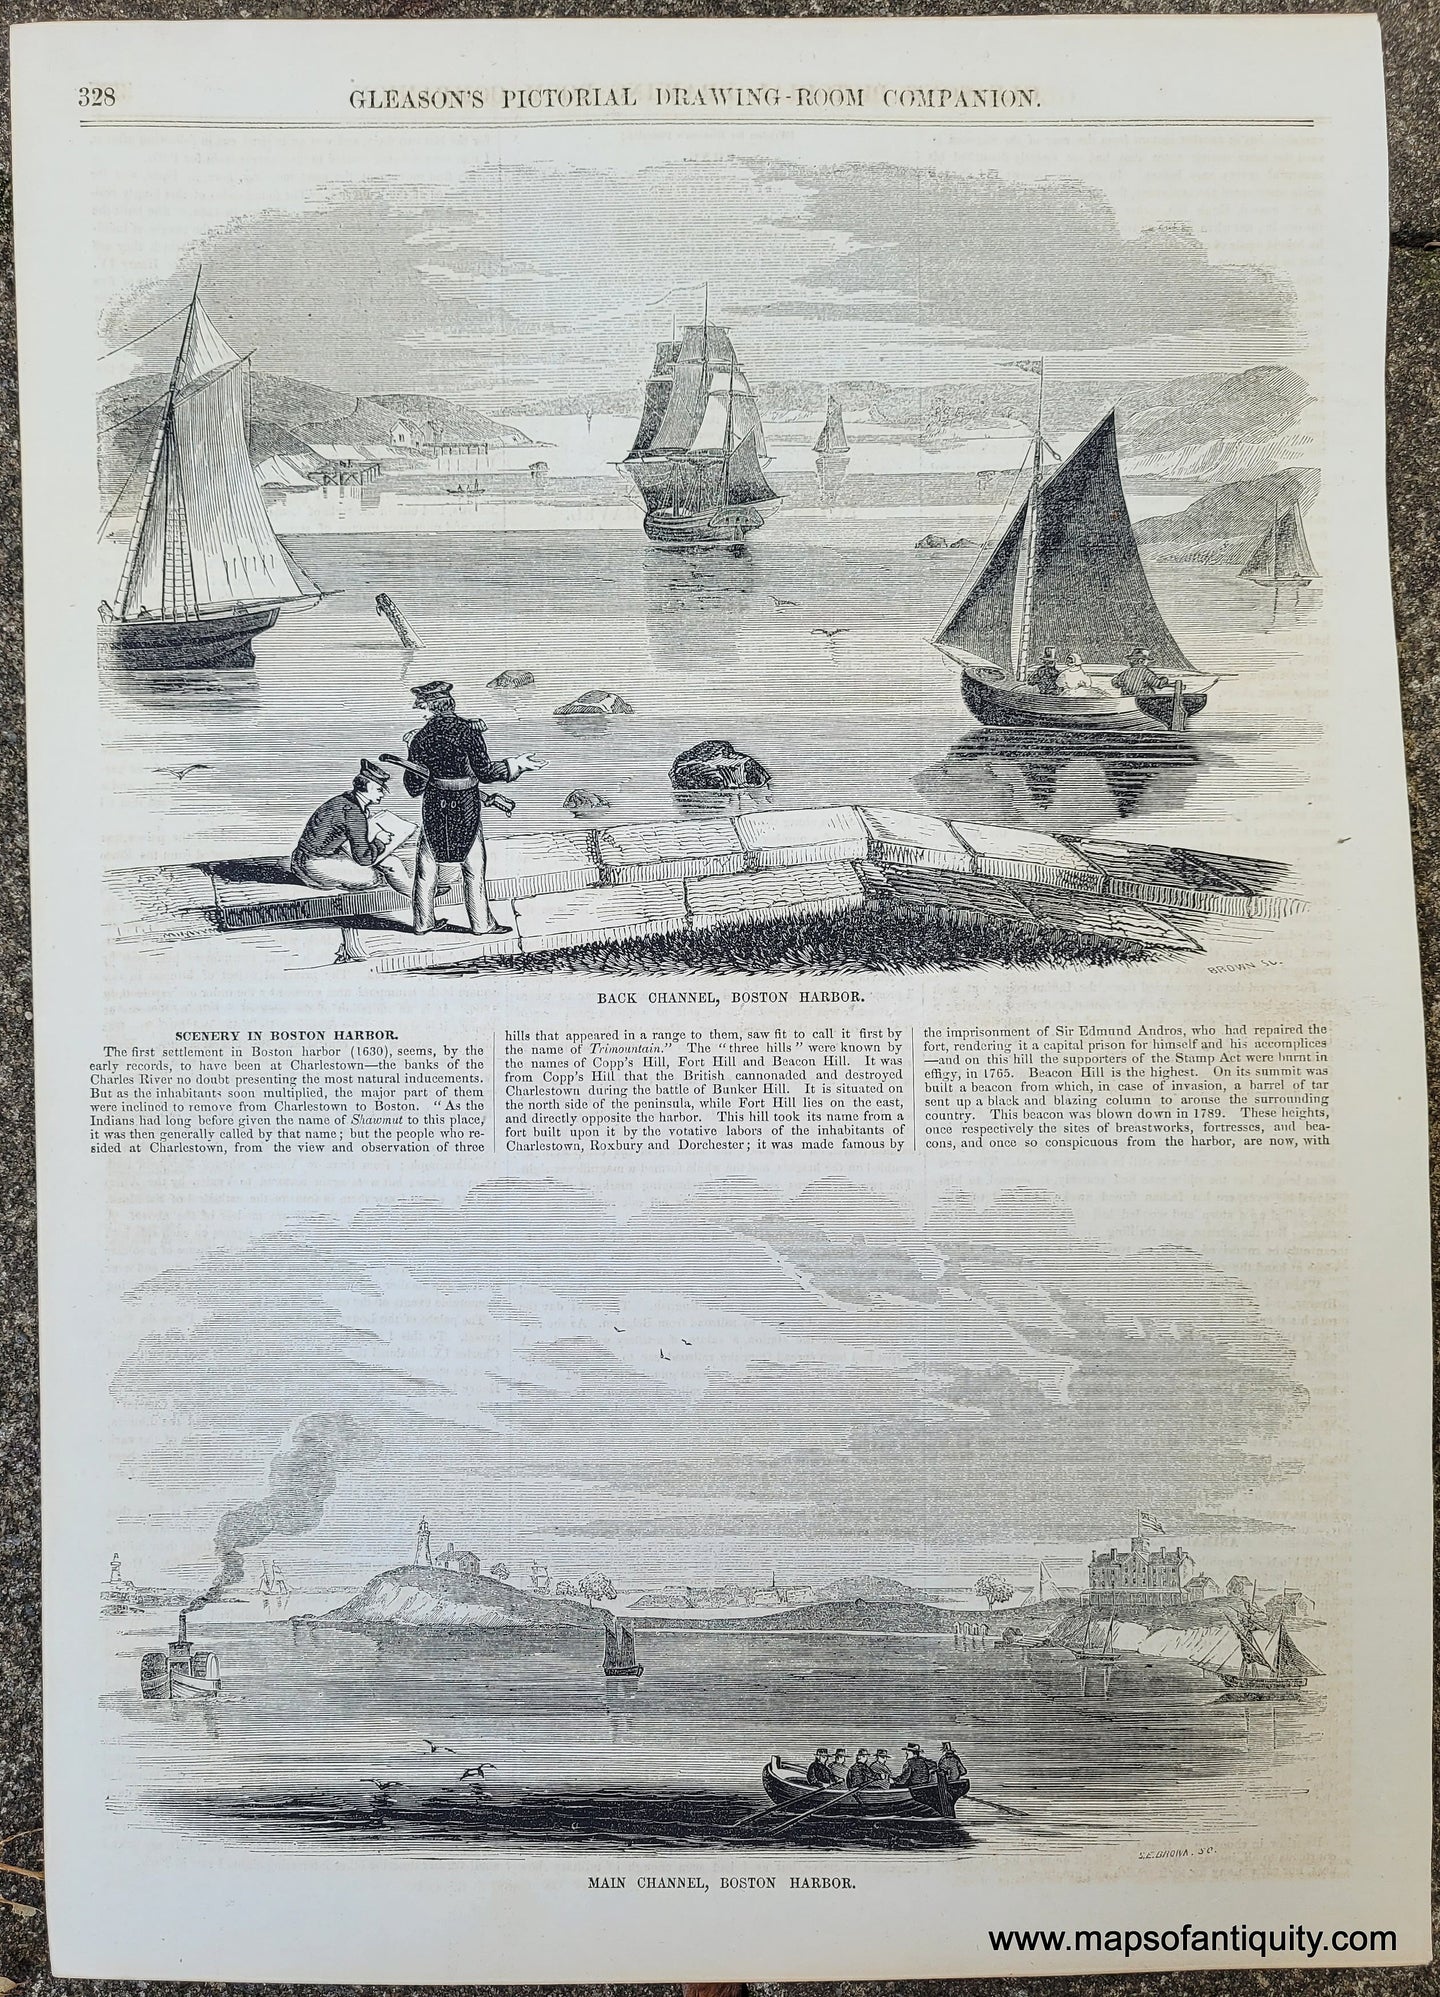 Genuine-Antique-Illustration-Print-Scenery-in-Boston-Harbor:-Back-Channel-and-Main-Channel-1854-Gleason's-Pictorial-Drawing-Room-Companion-PRN077-Maps-Of-Antiquity